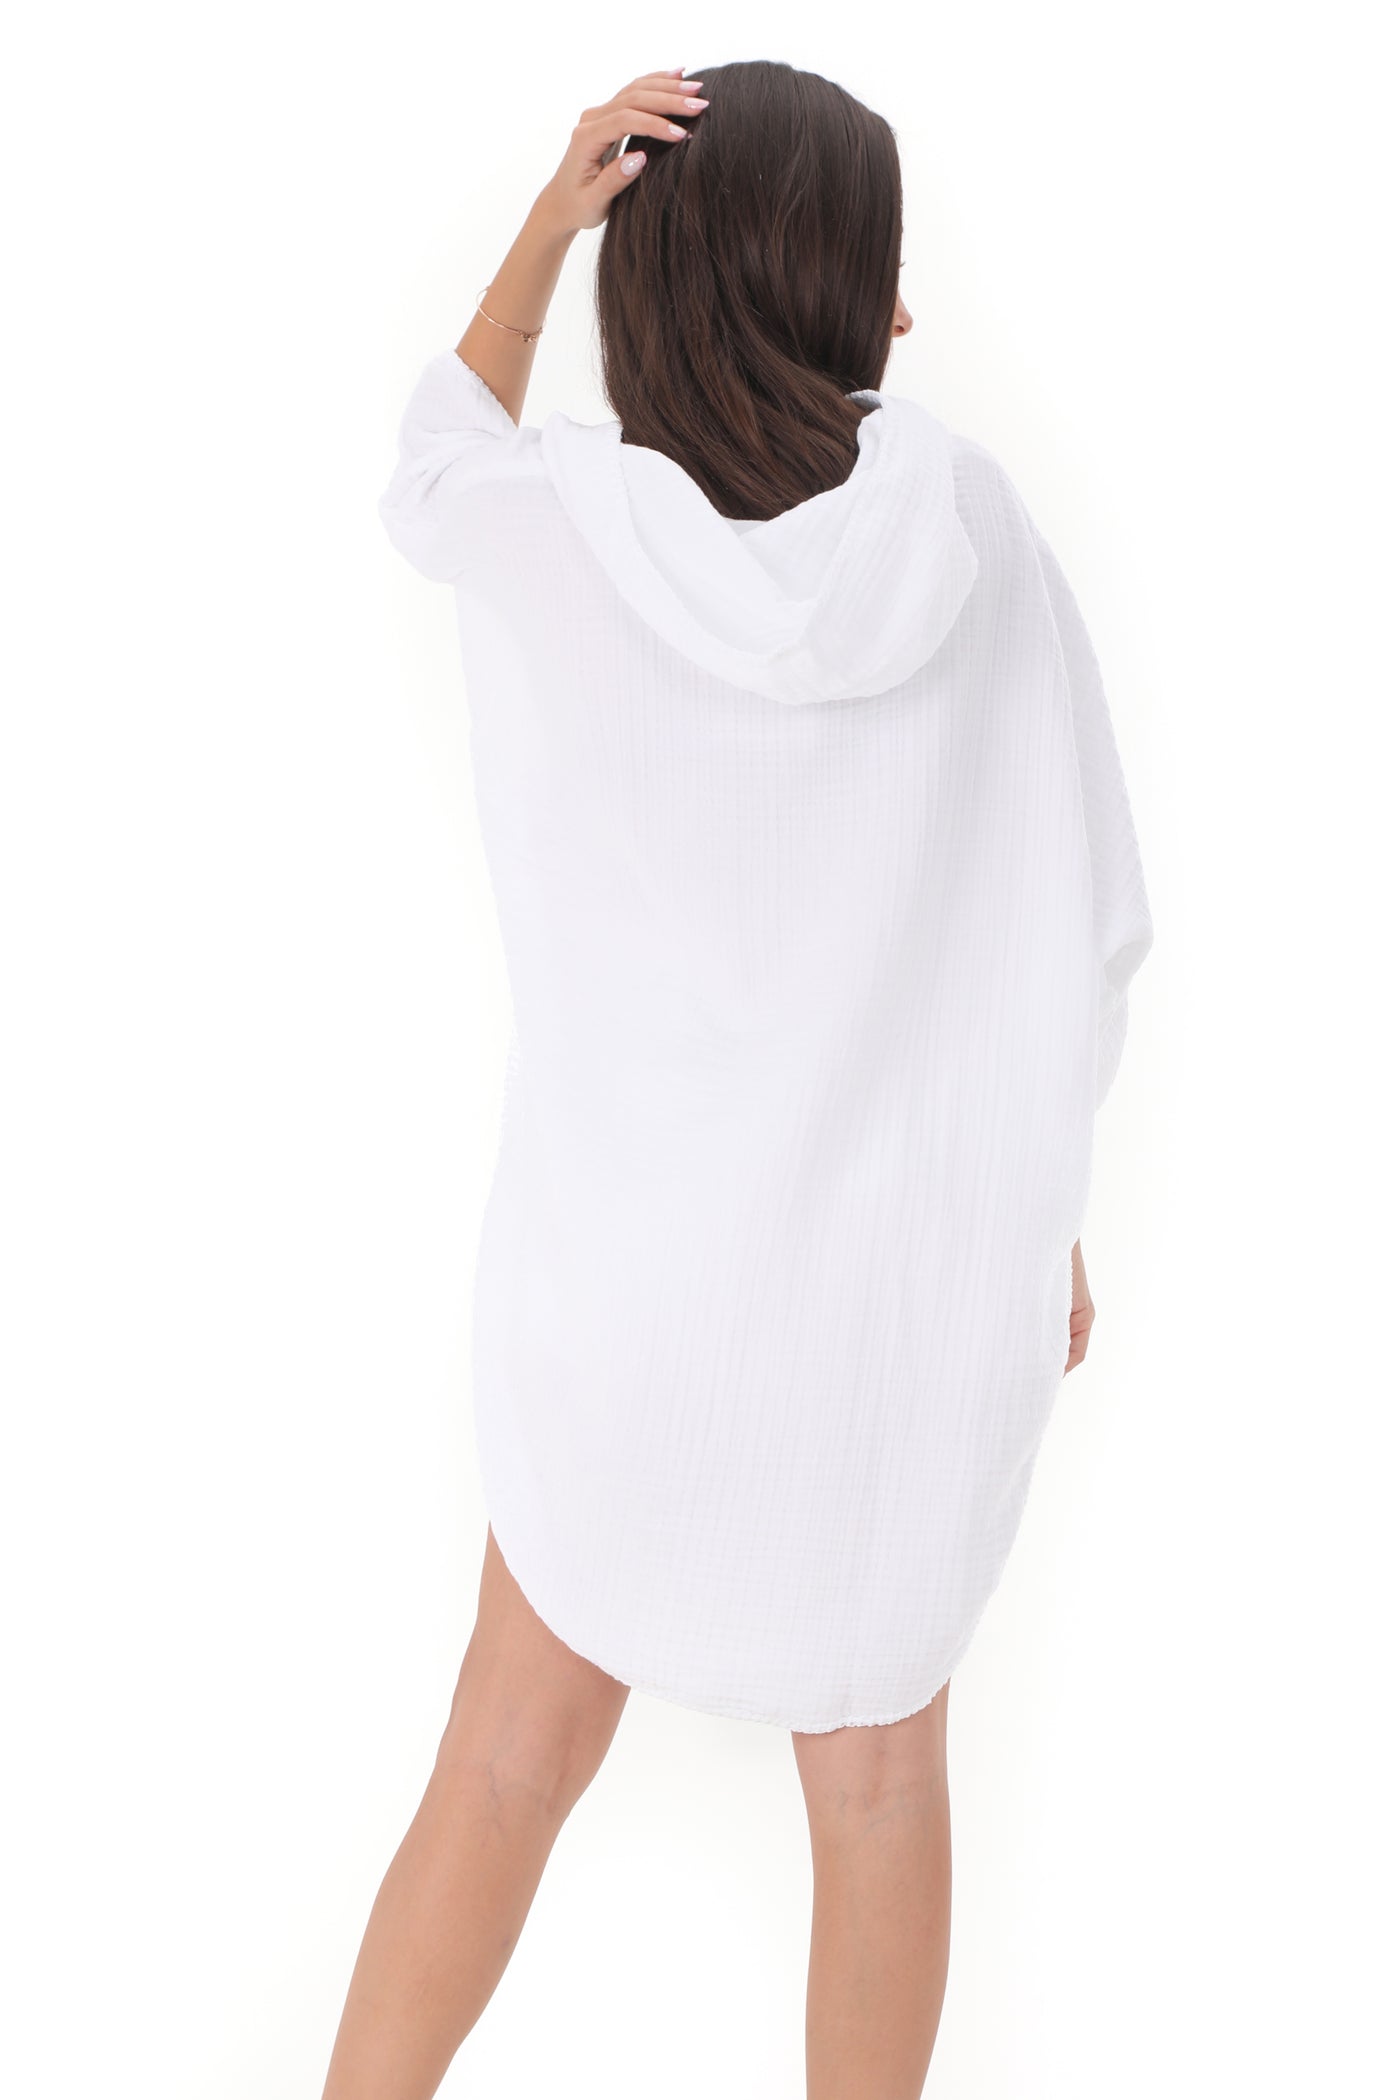 The Barine Cocoon (4 Layer Muslin) Adult Poncho